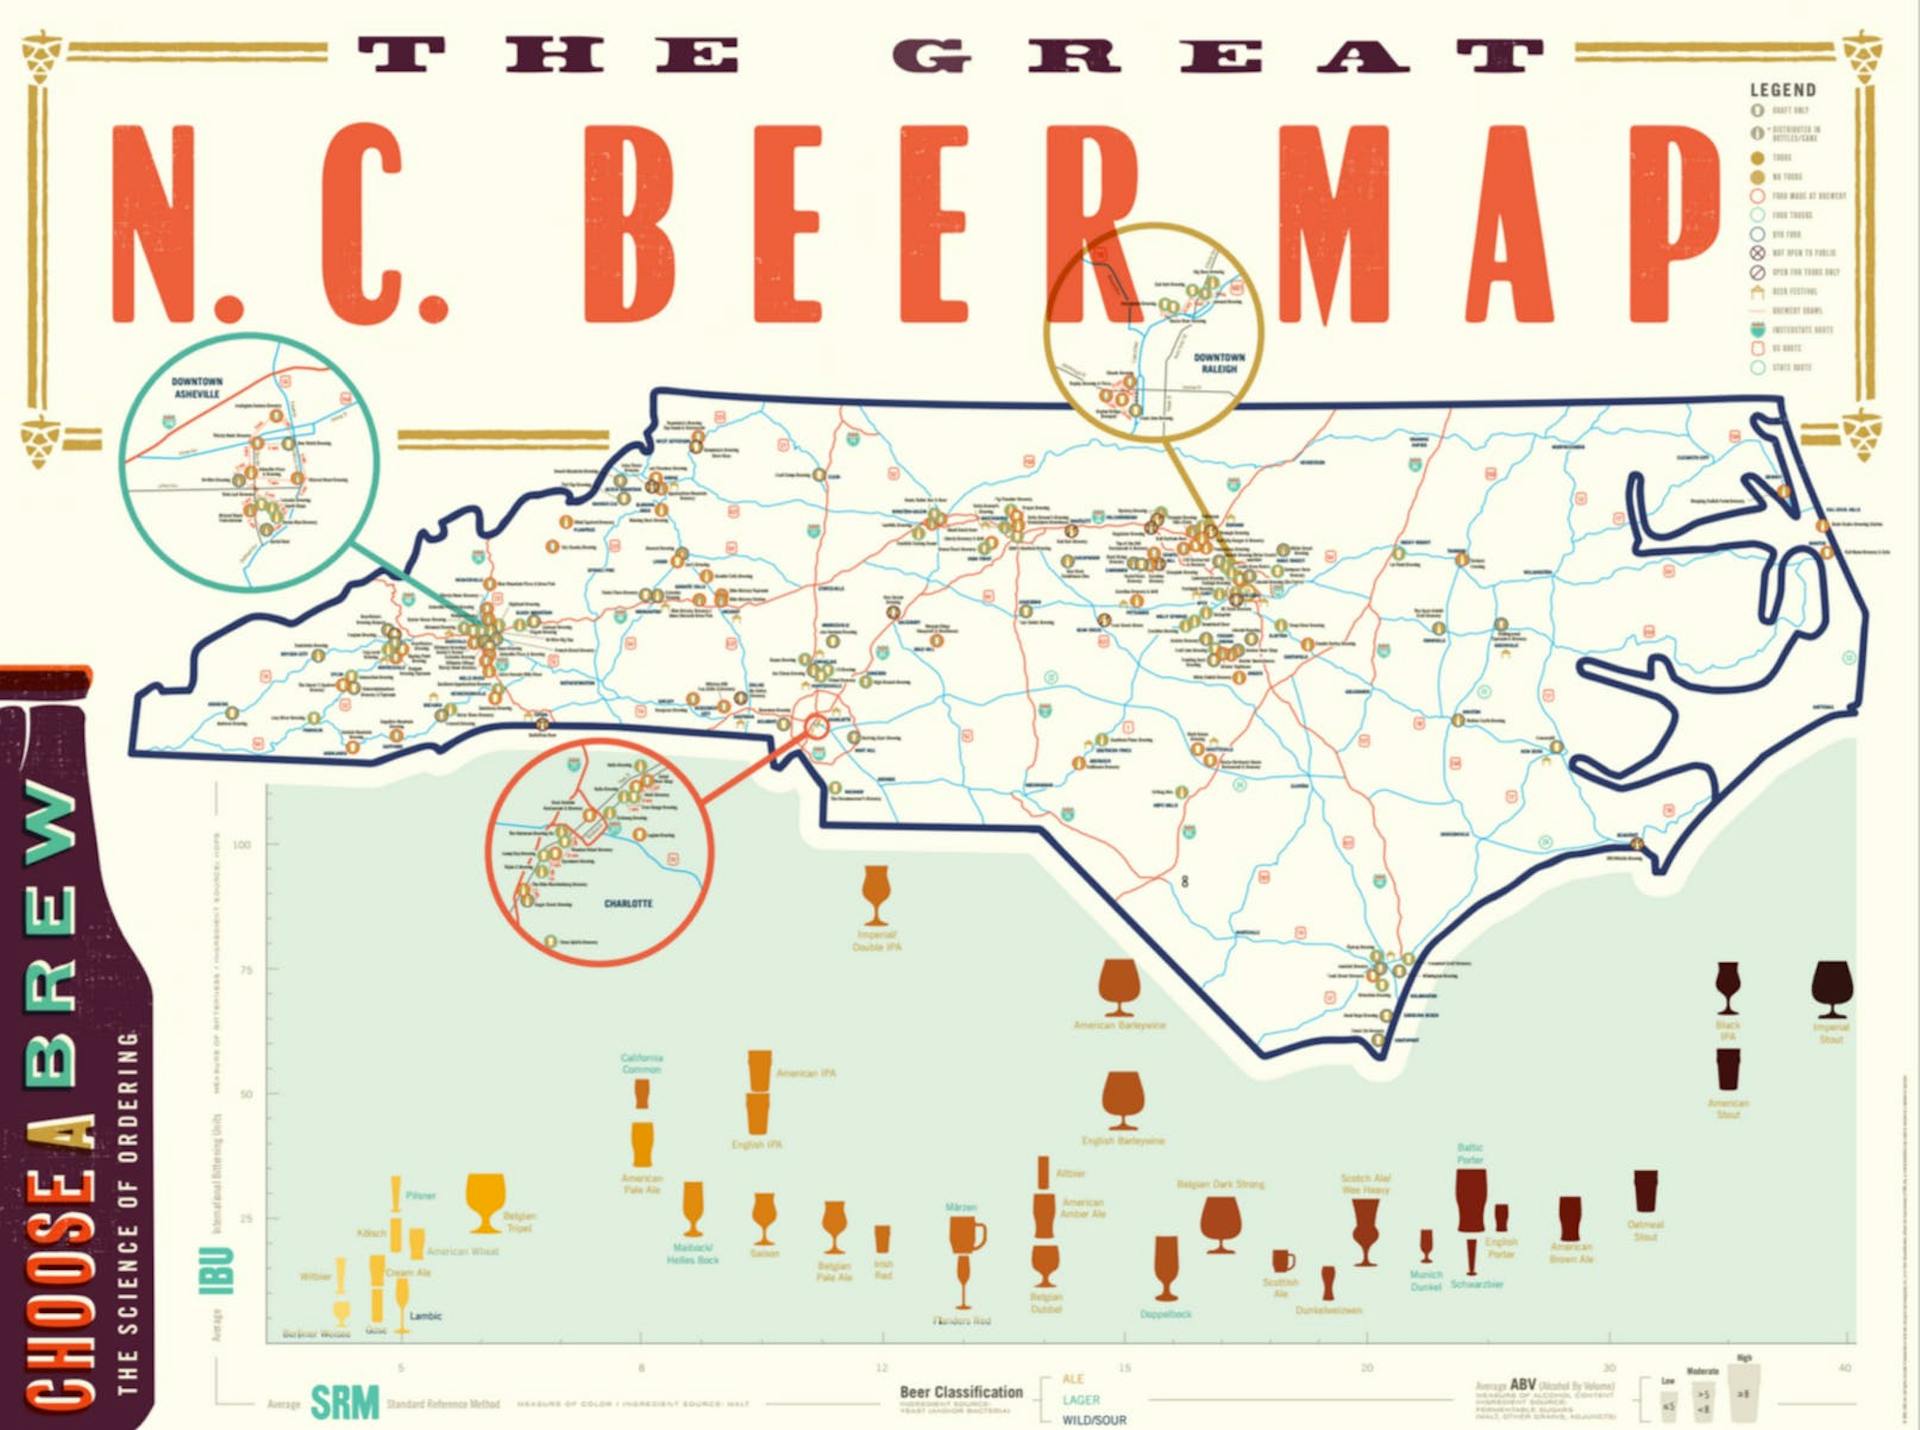 beer-map-front-s